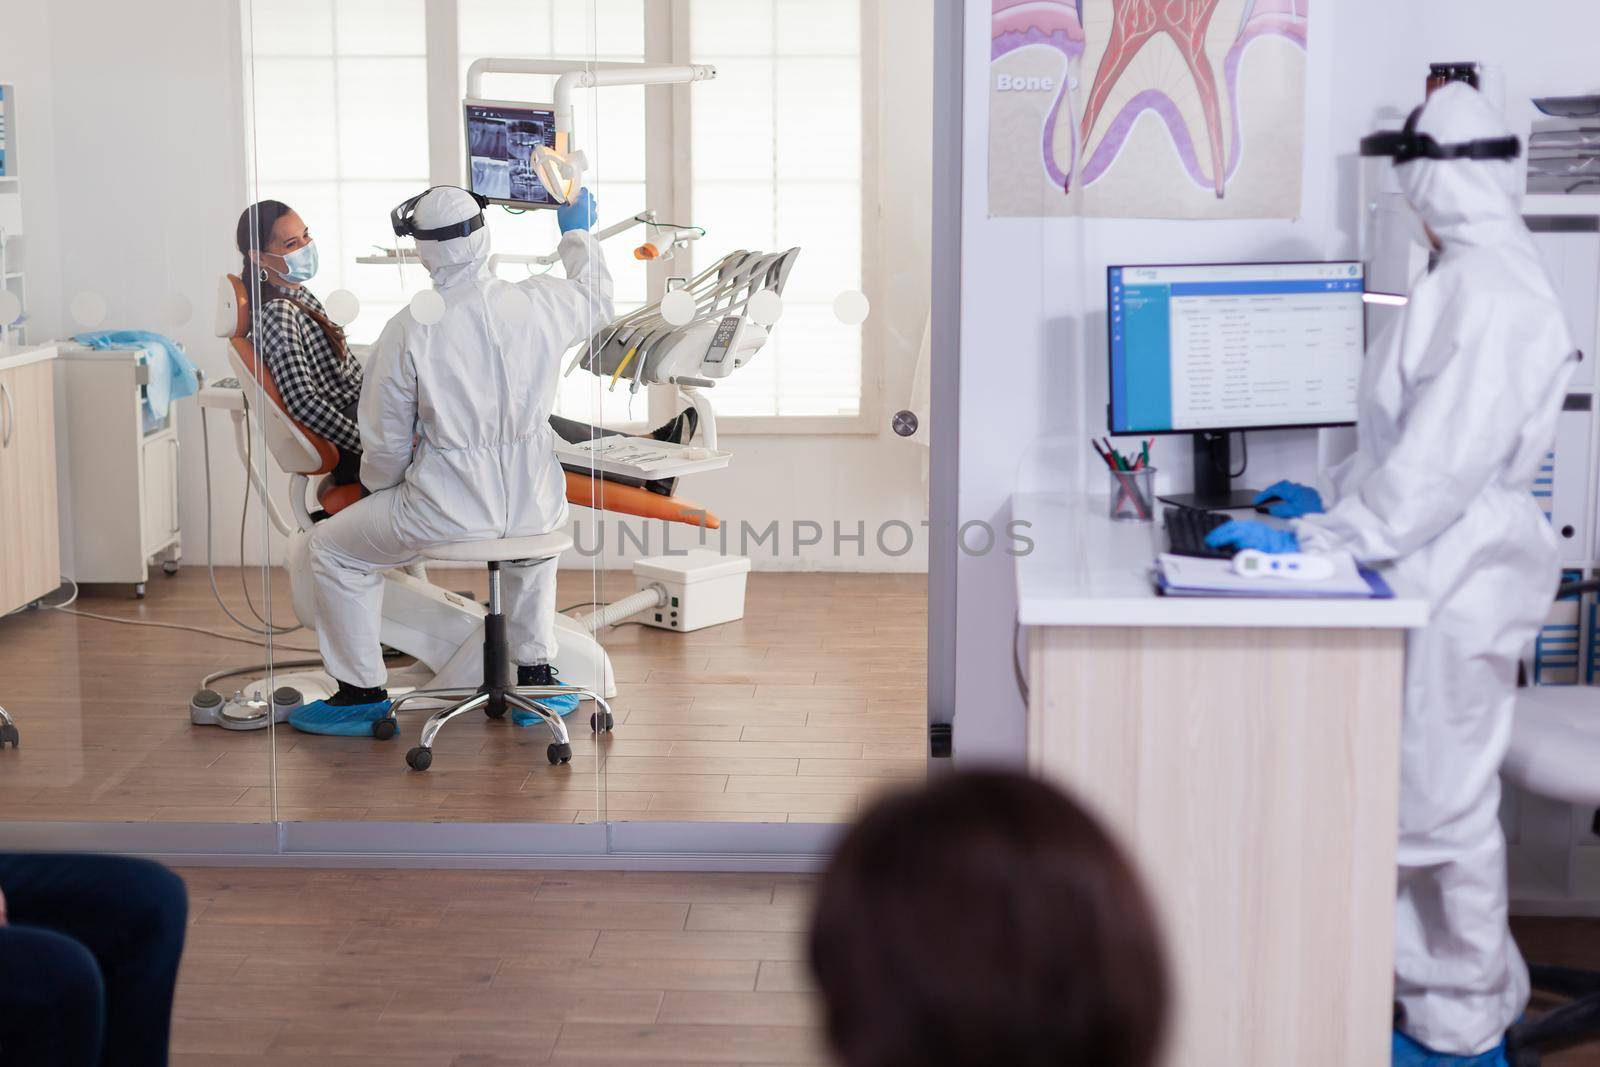 Stomatologist in protective suit asking patient teeth problems by DCStudio